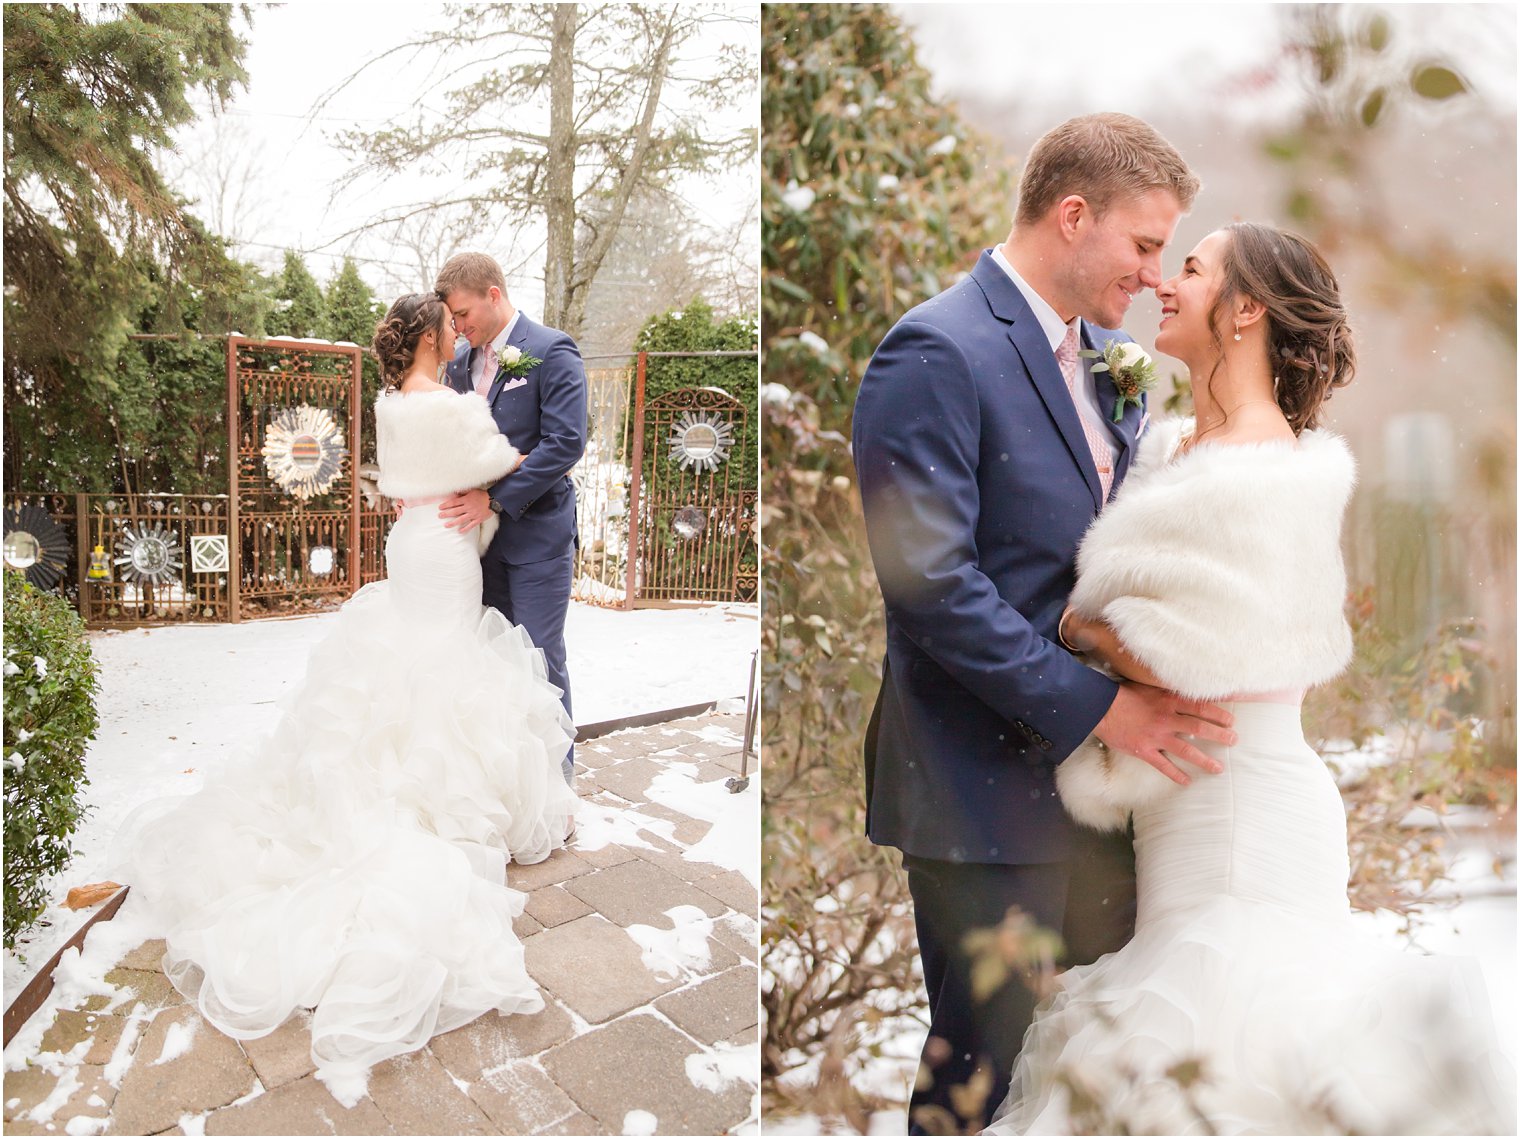 Romantic portraits of bride and groom at Stone House at Stirling Ridge in Warren, NJ